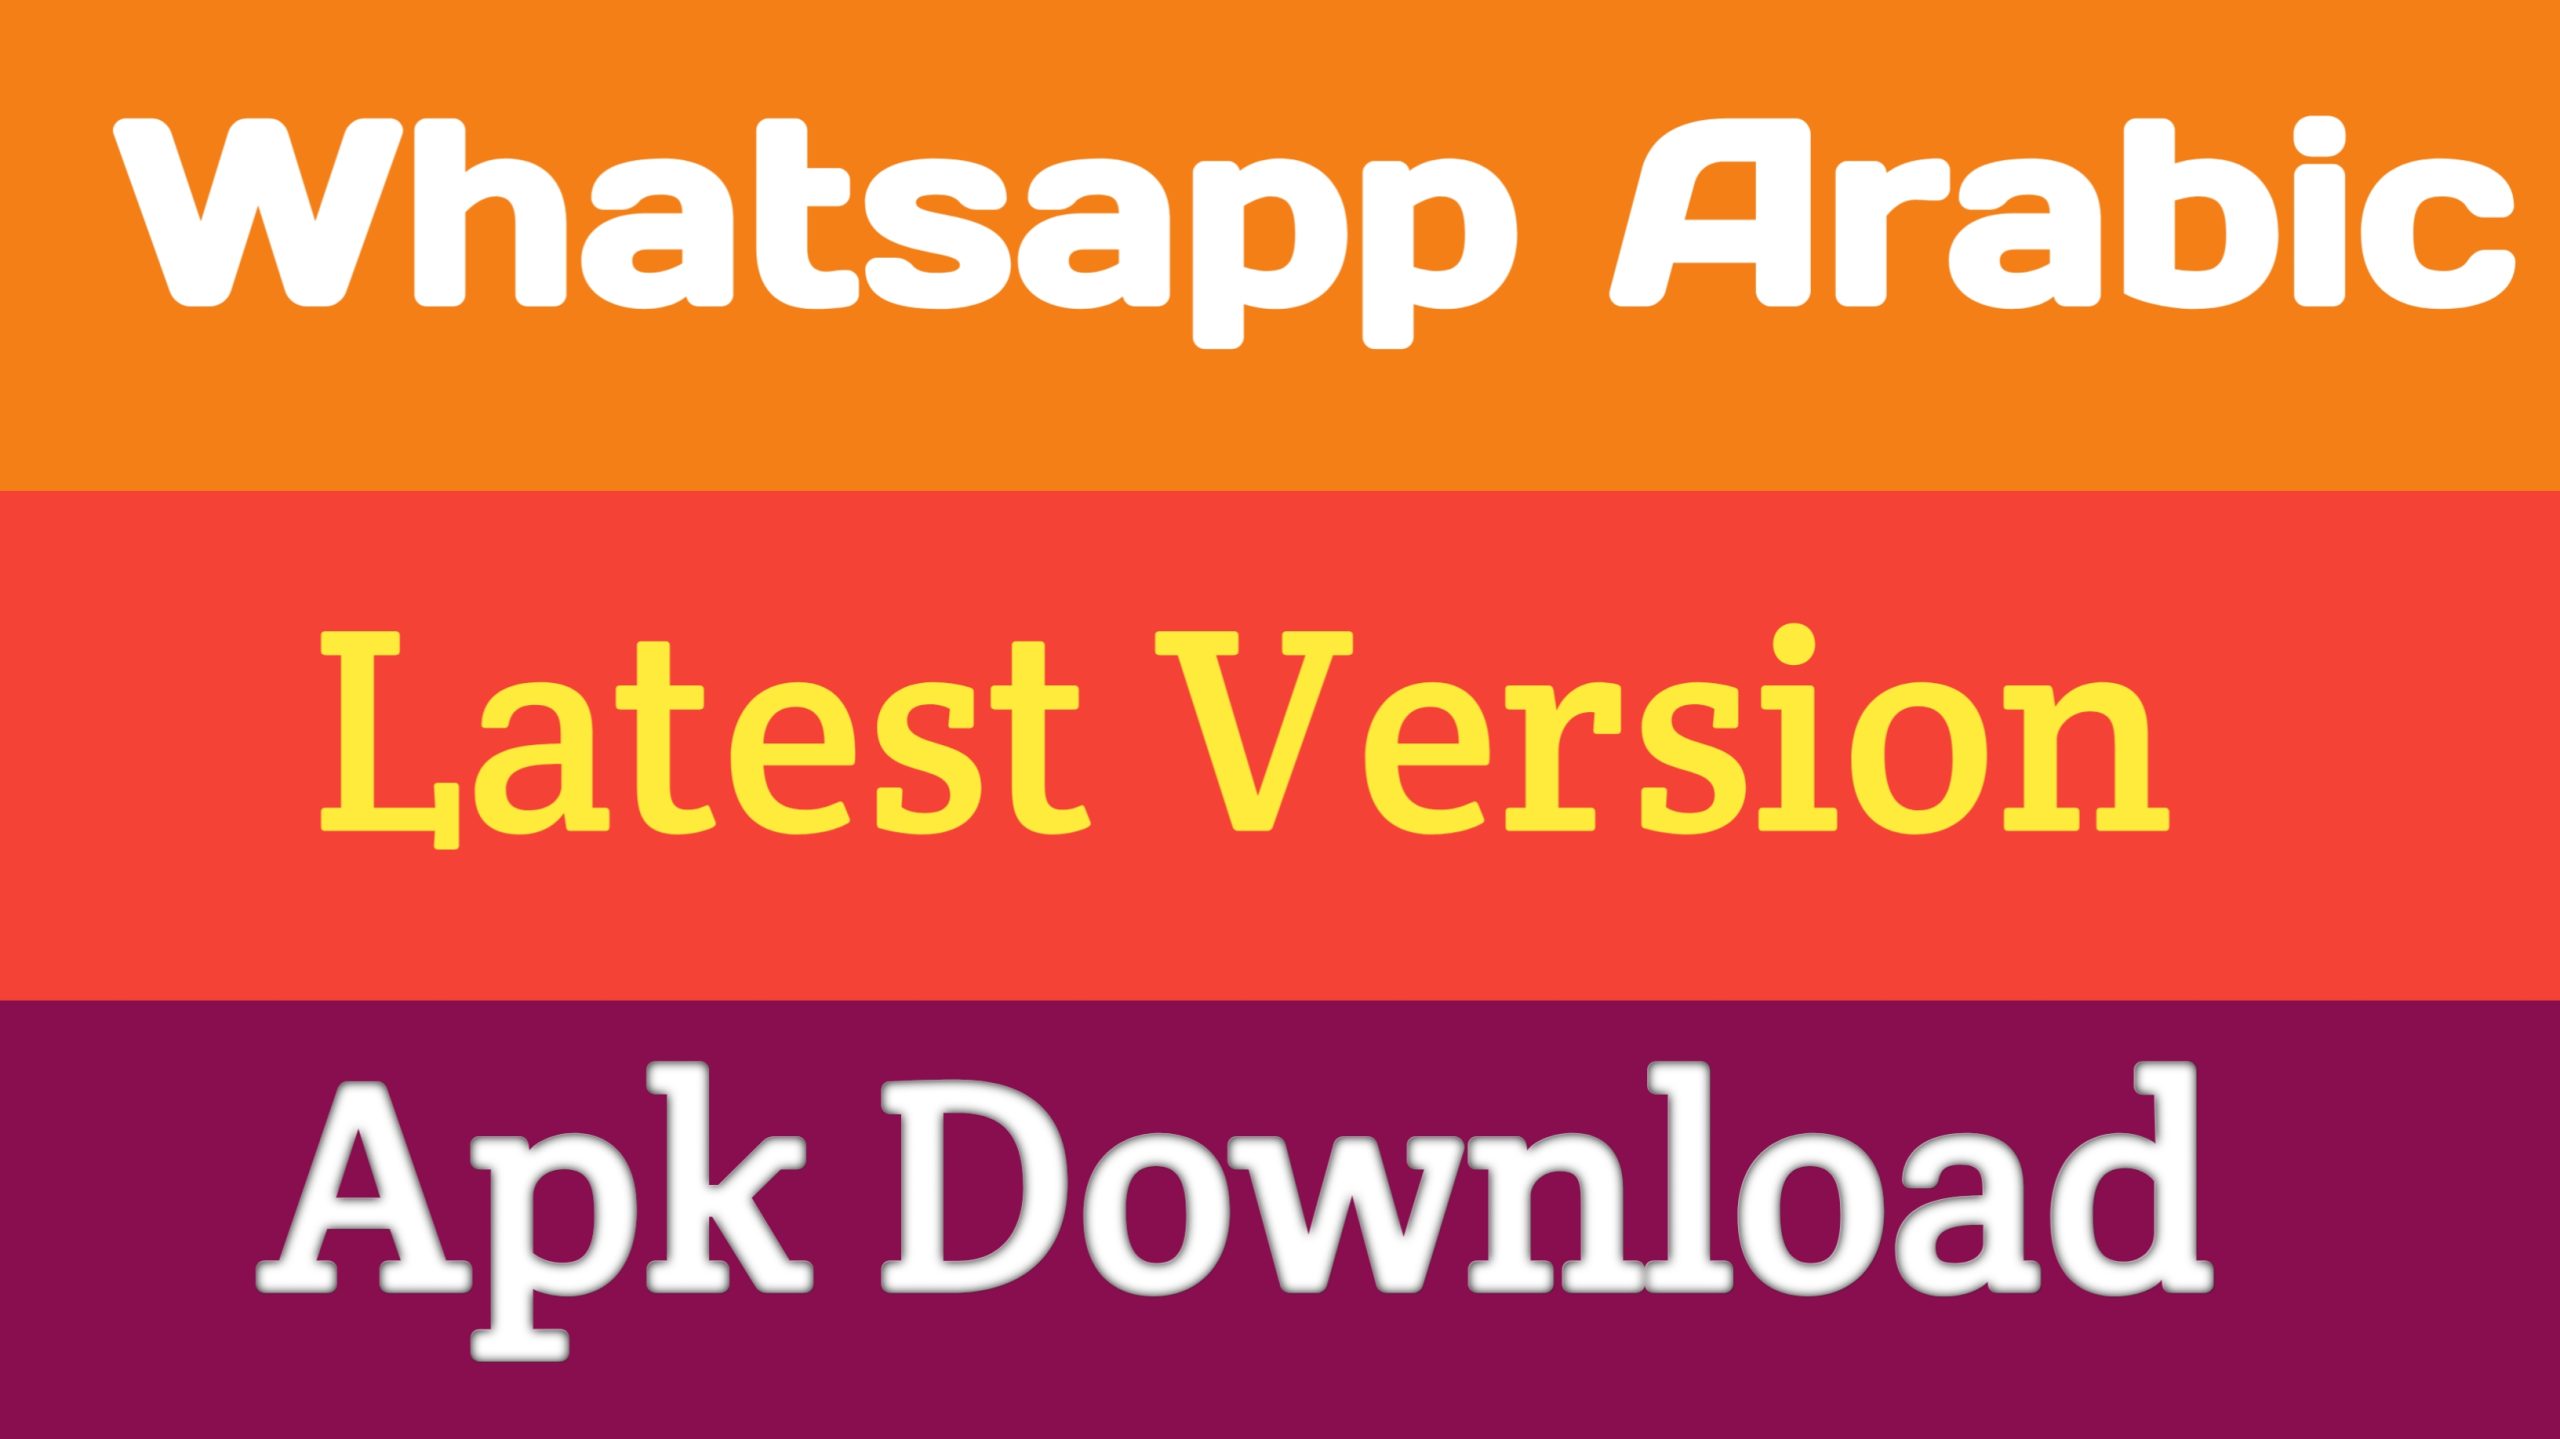 WhatsApp Arabic Features and Download Tips